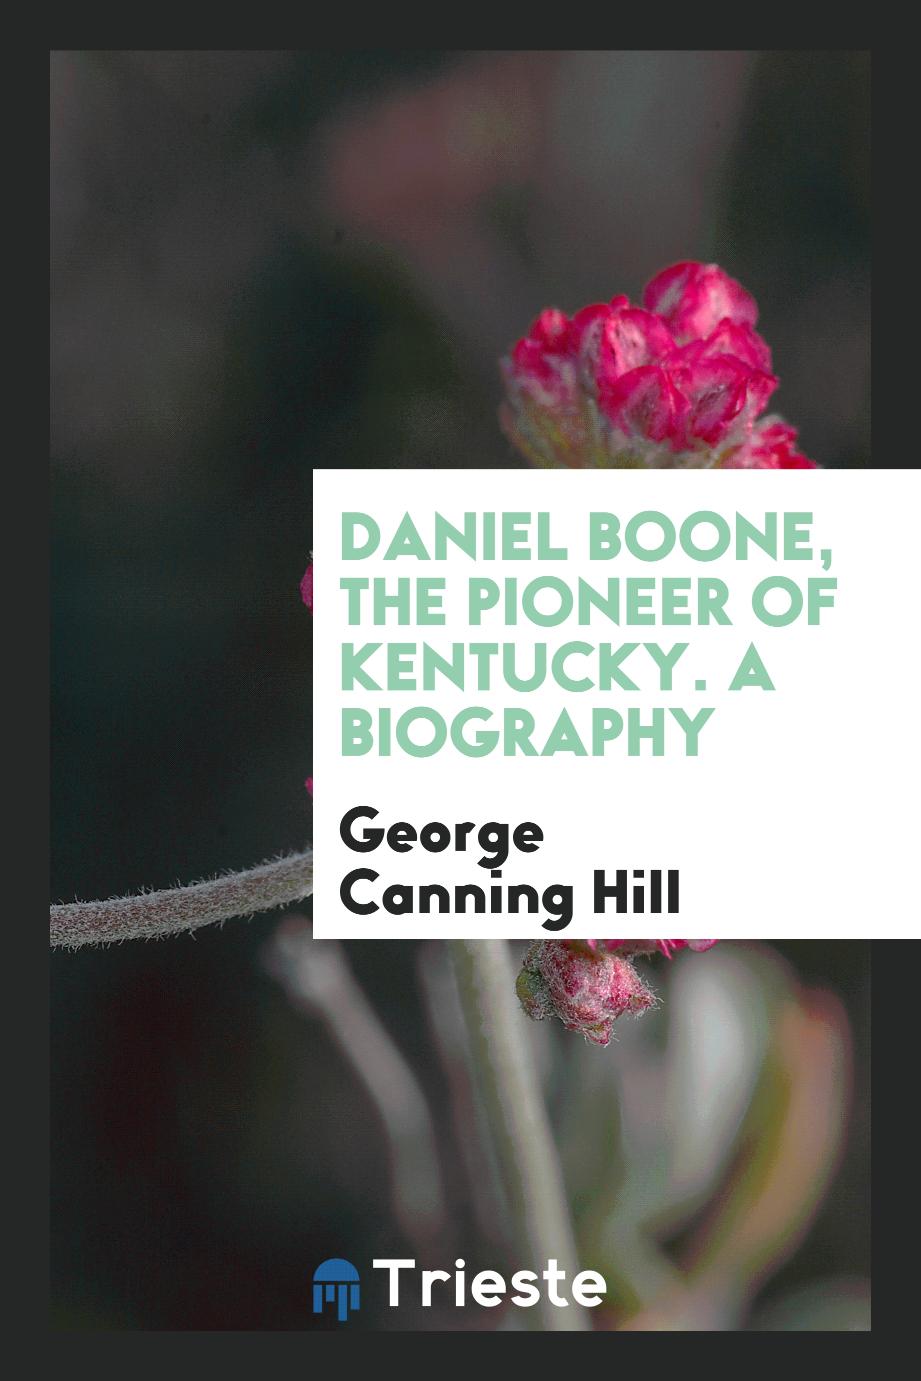 Daniel Boone, the pioneer of Kentucky. A biography